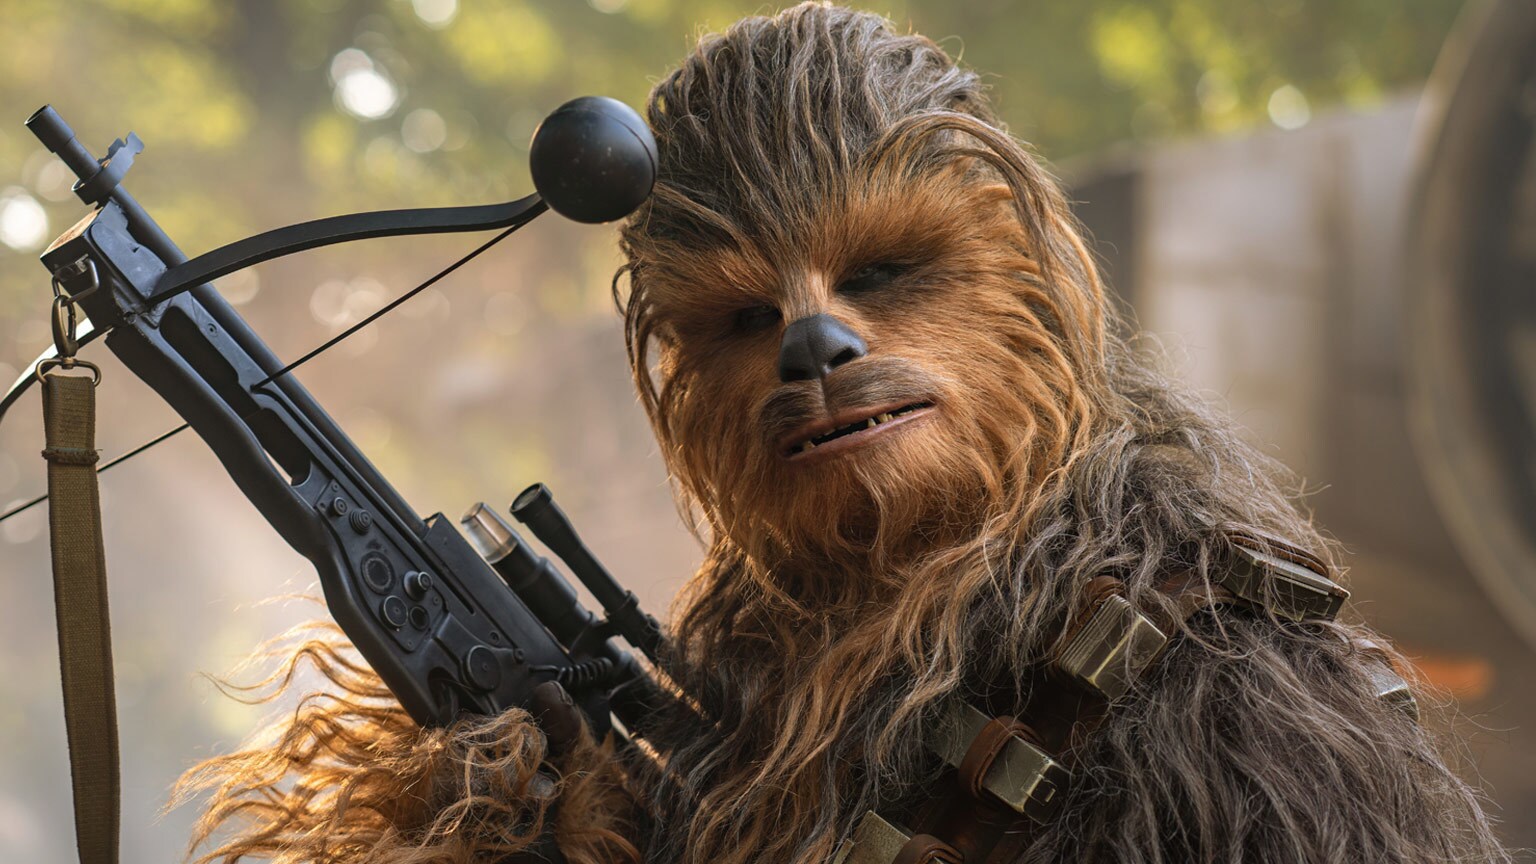 5 Reasons Why Chewbacca is the Best Friend in the Galaxy